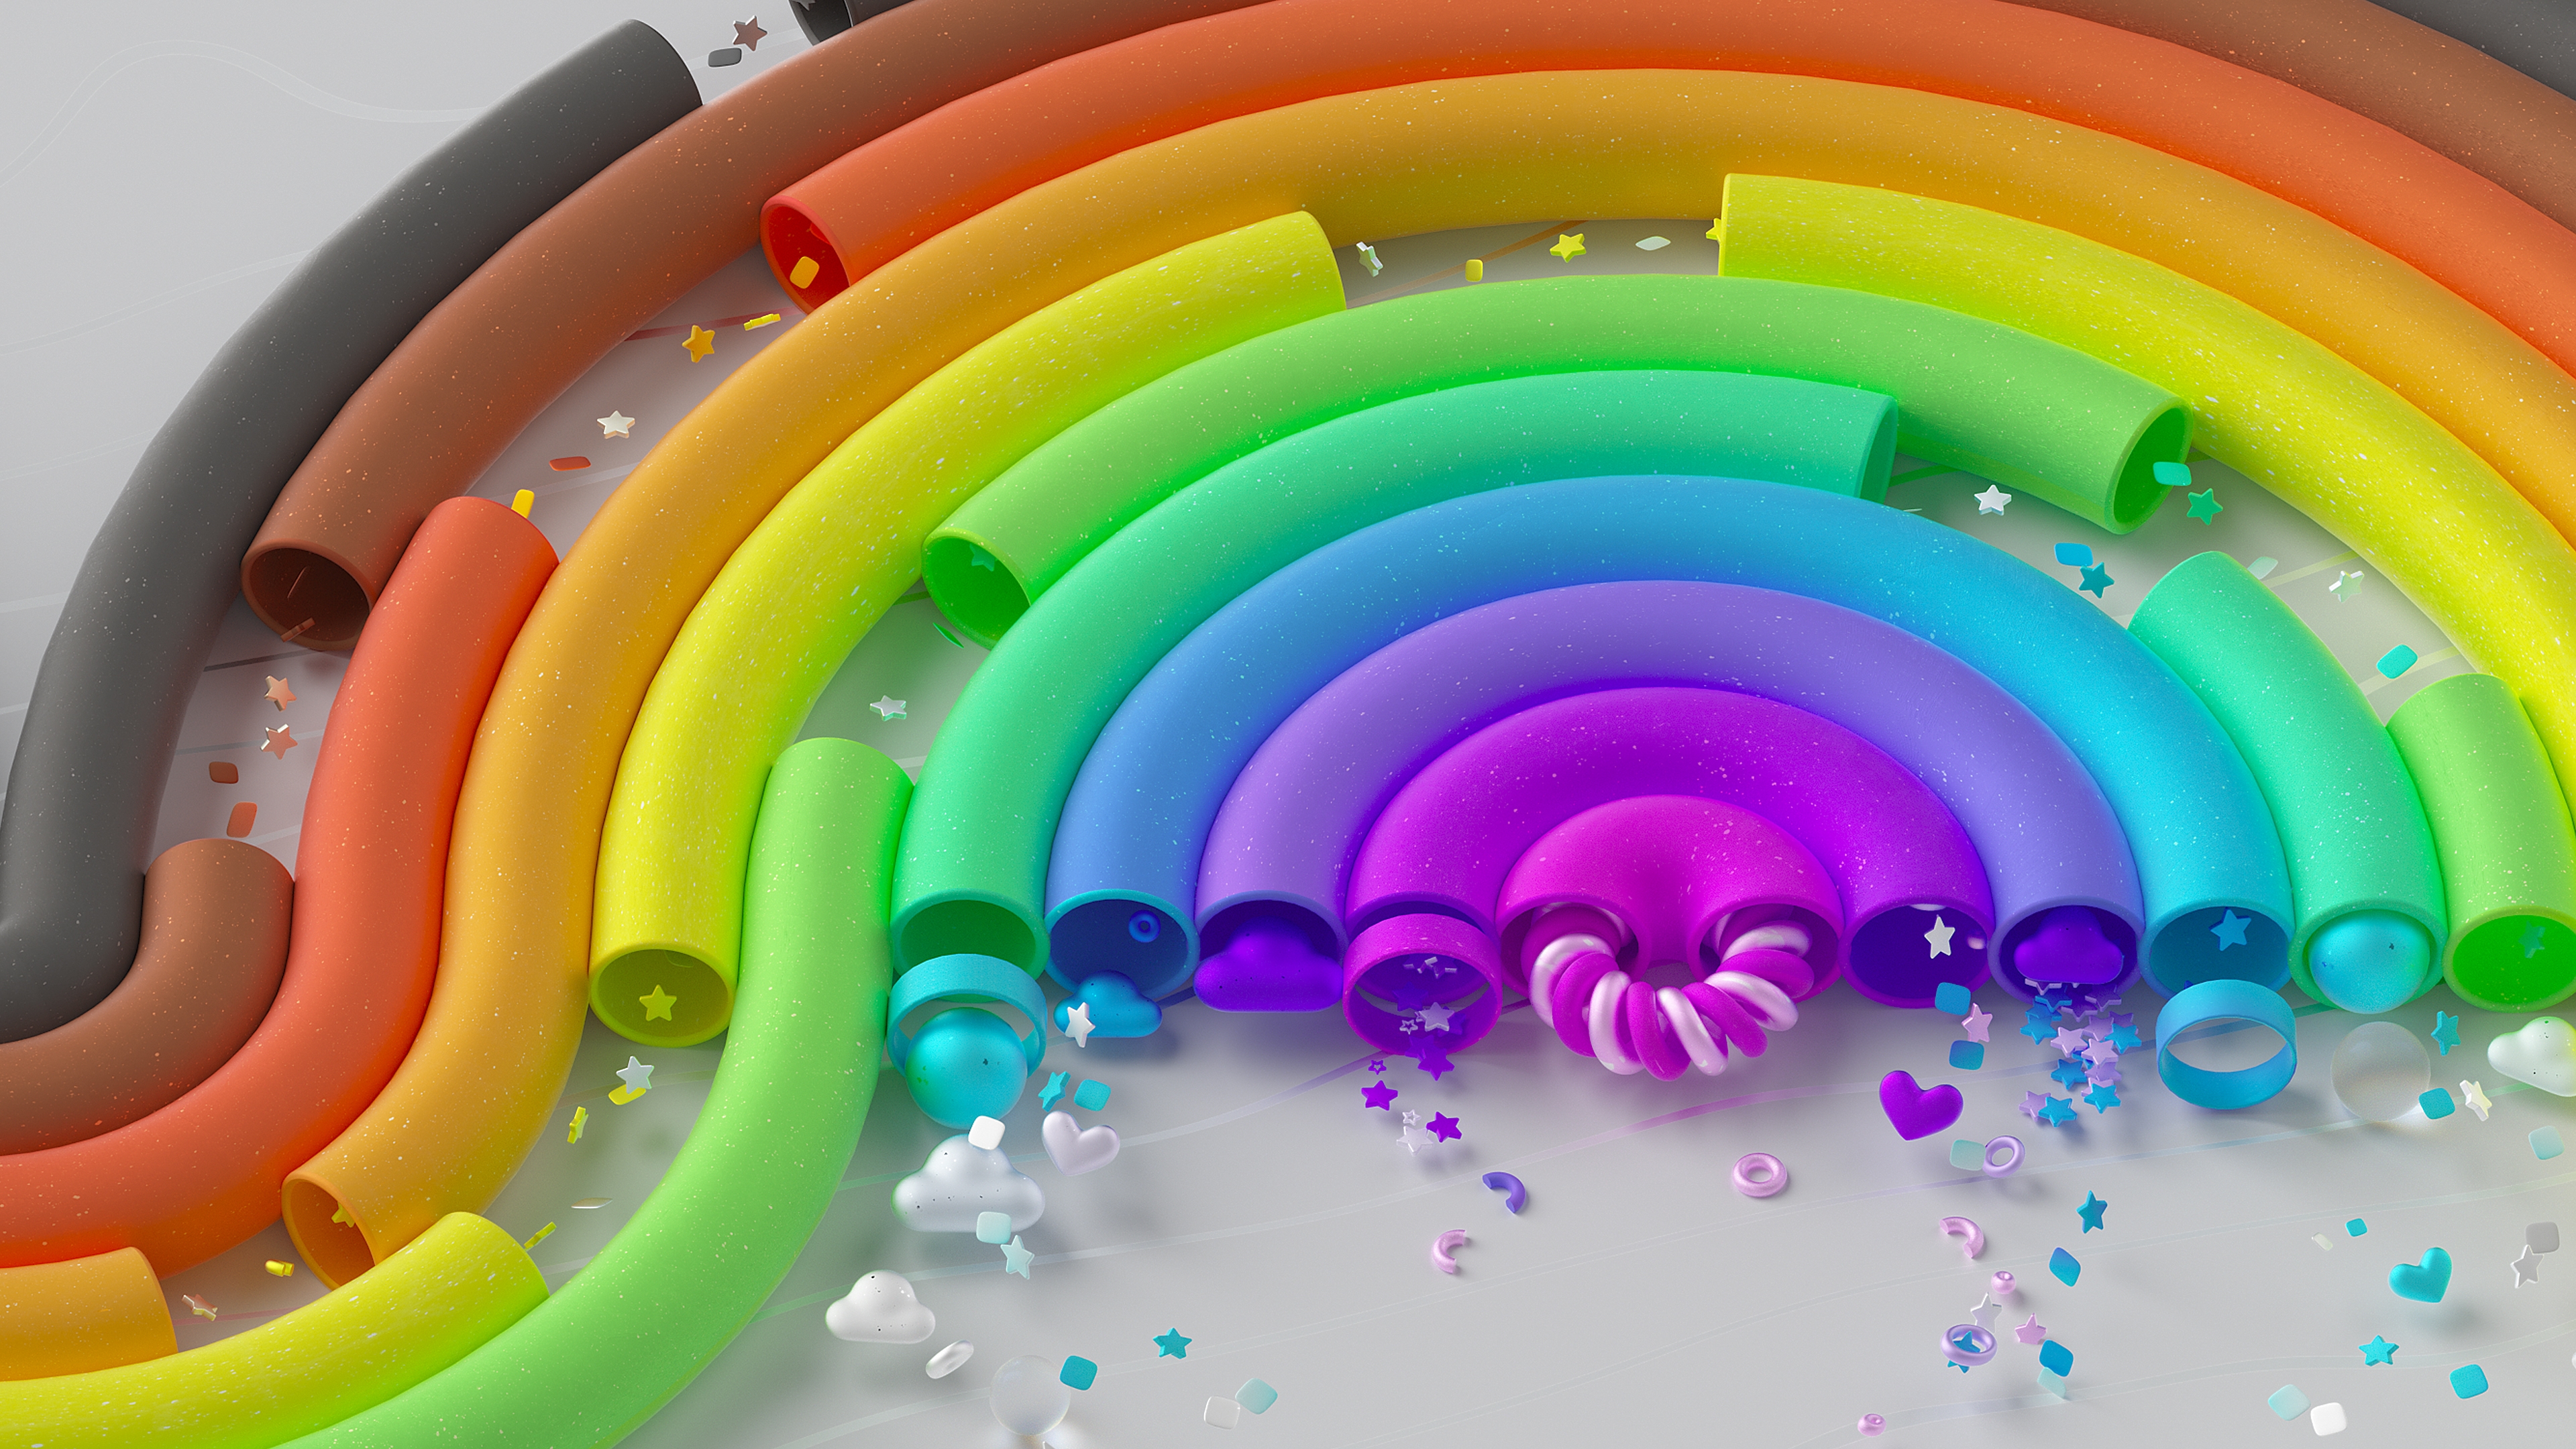 HD wallpaper, Microsoft Design, Lgbtq, Abstract Rainbow, 3D Background, Microsoft Pride, Surreal, Colorful Background, Aesthetic